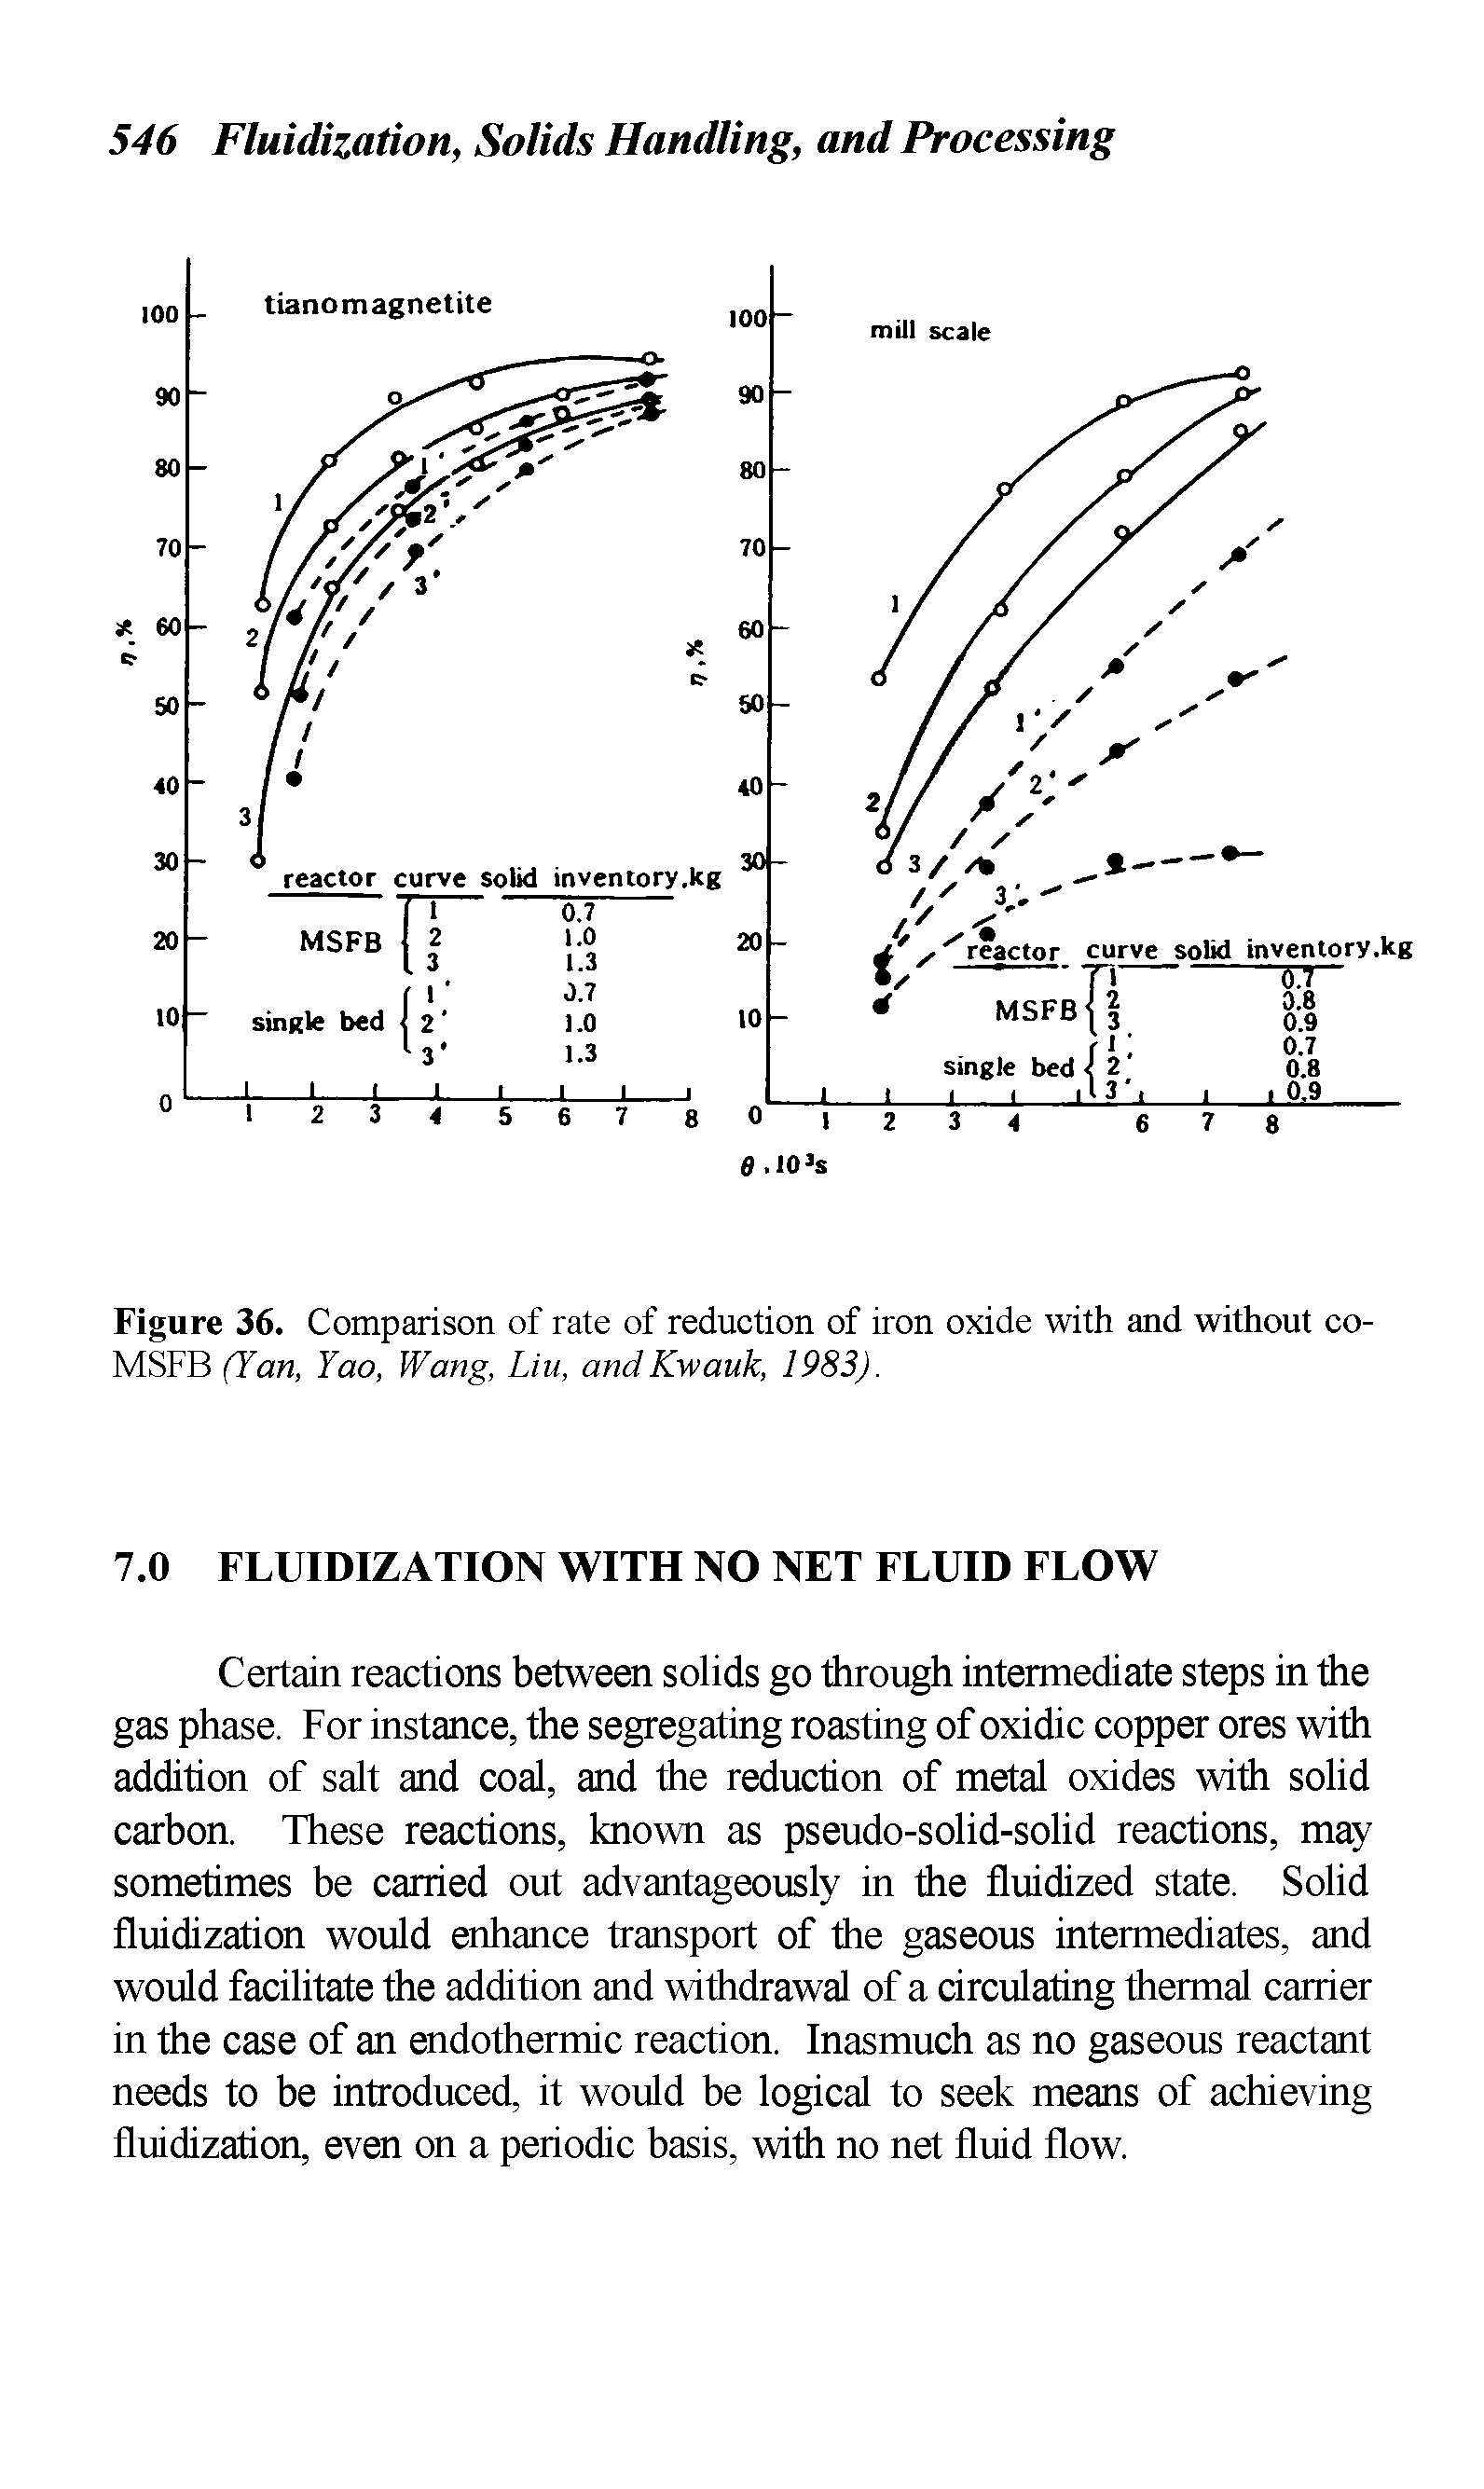 Figure 36. Comparison of rate of reduction of iron oxide with and without co-MSFB (Tan, Yao, Wang, Liu, andKwauk, 1983).